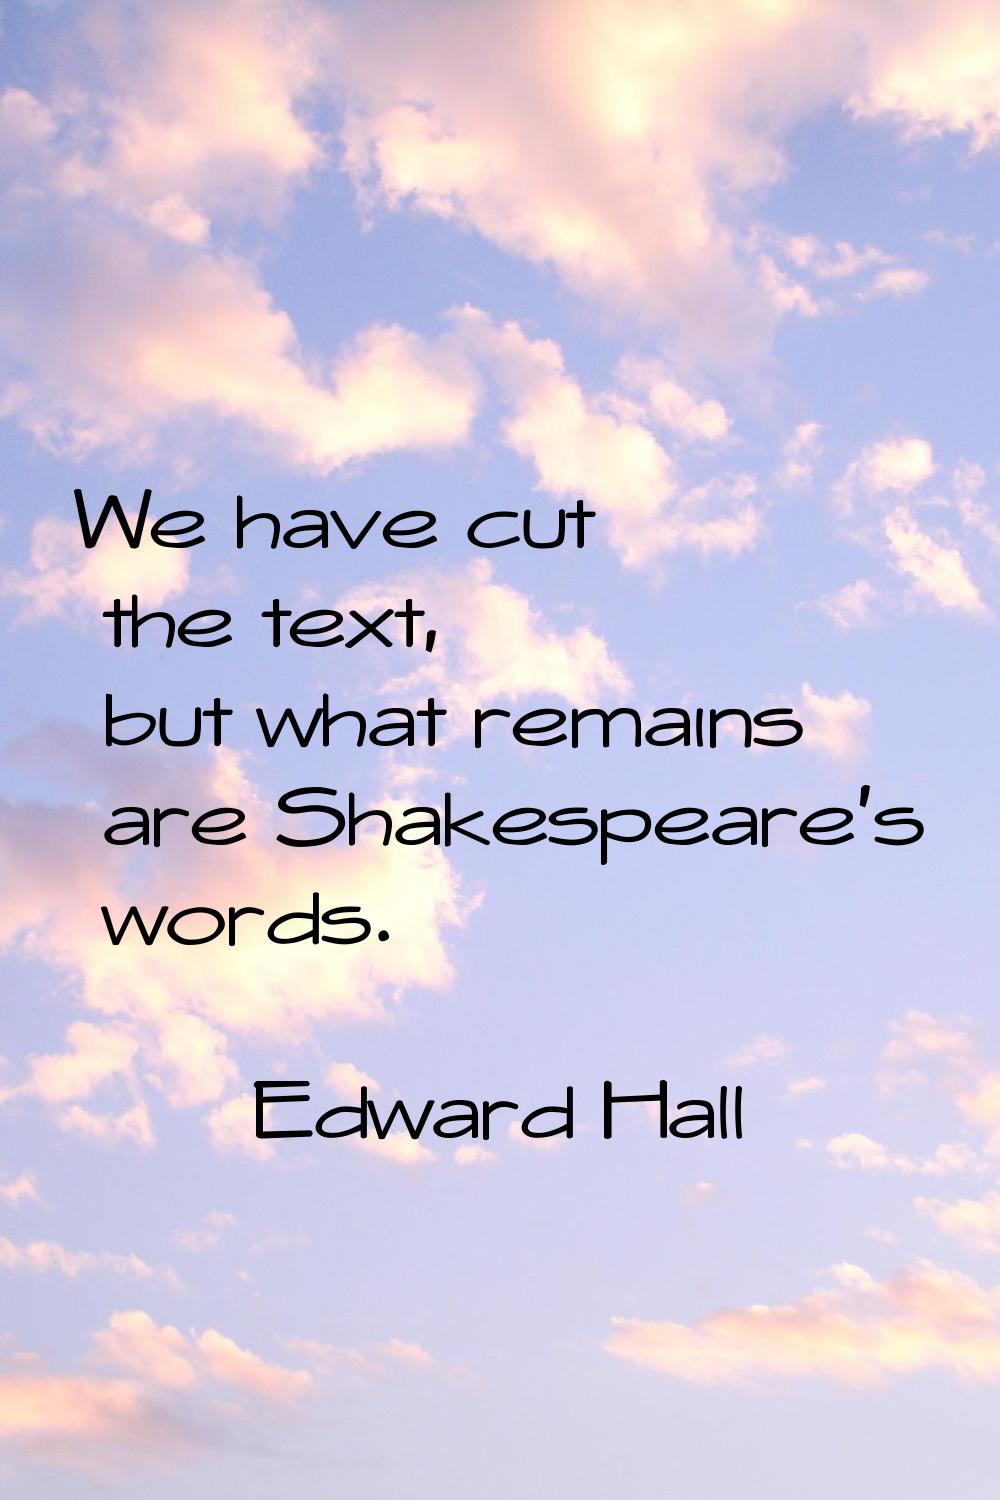 We have cut the text, but what remains are Shakespeare's words.